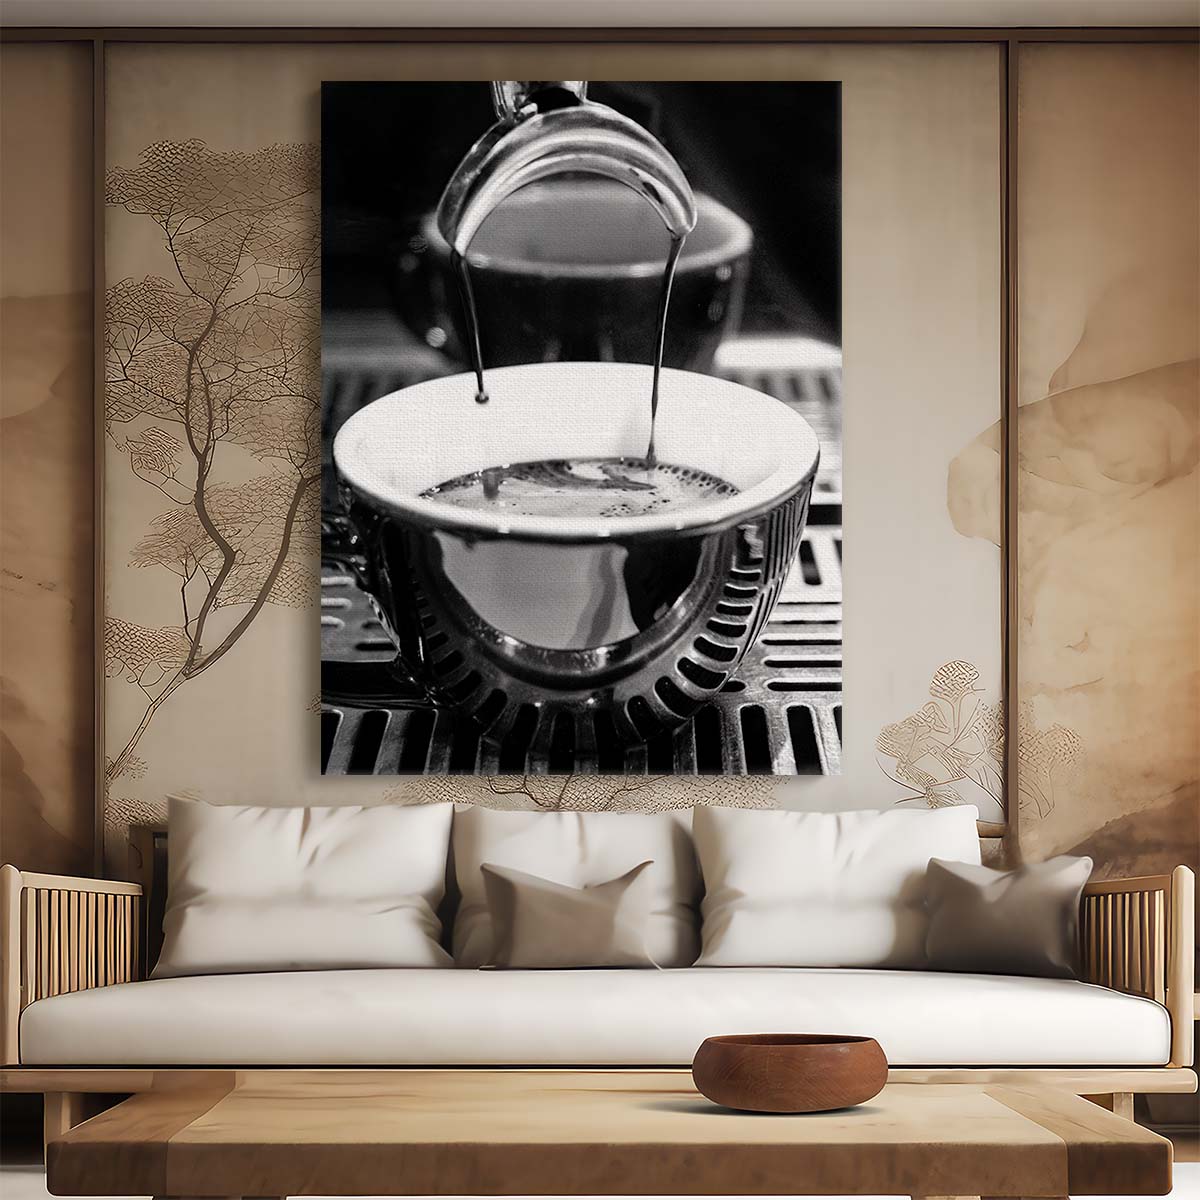 Monochrome Still Life Photography of Espresso Dripping in Café Mug by Luxuriance Designs, made in USA